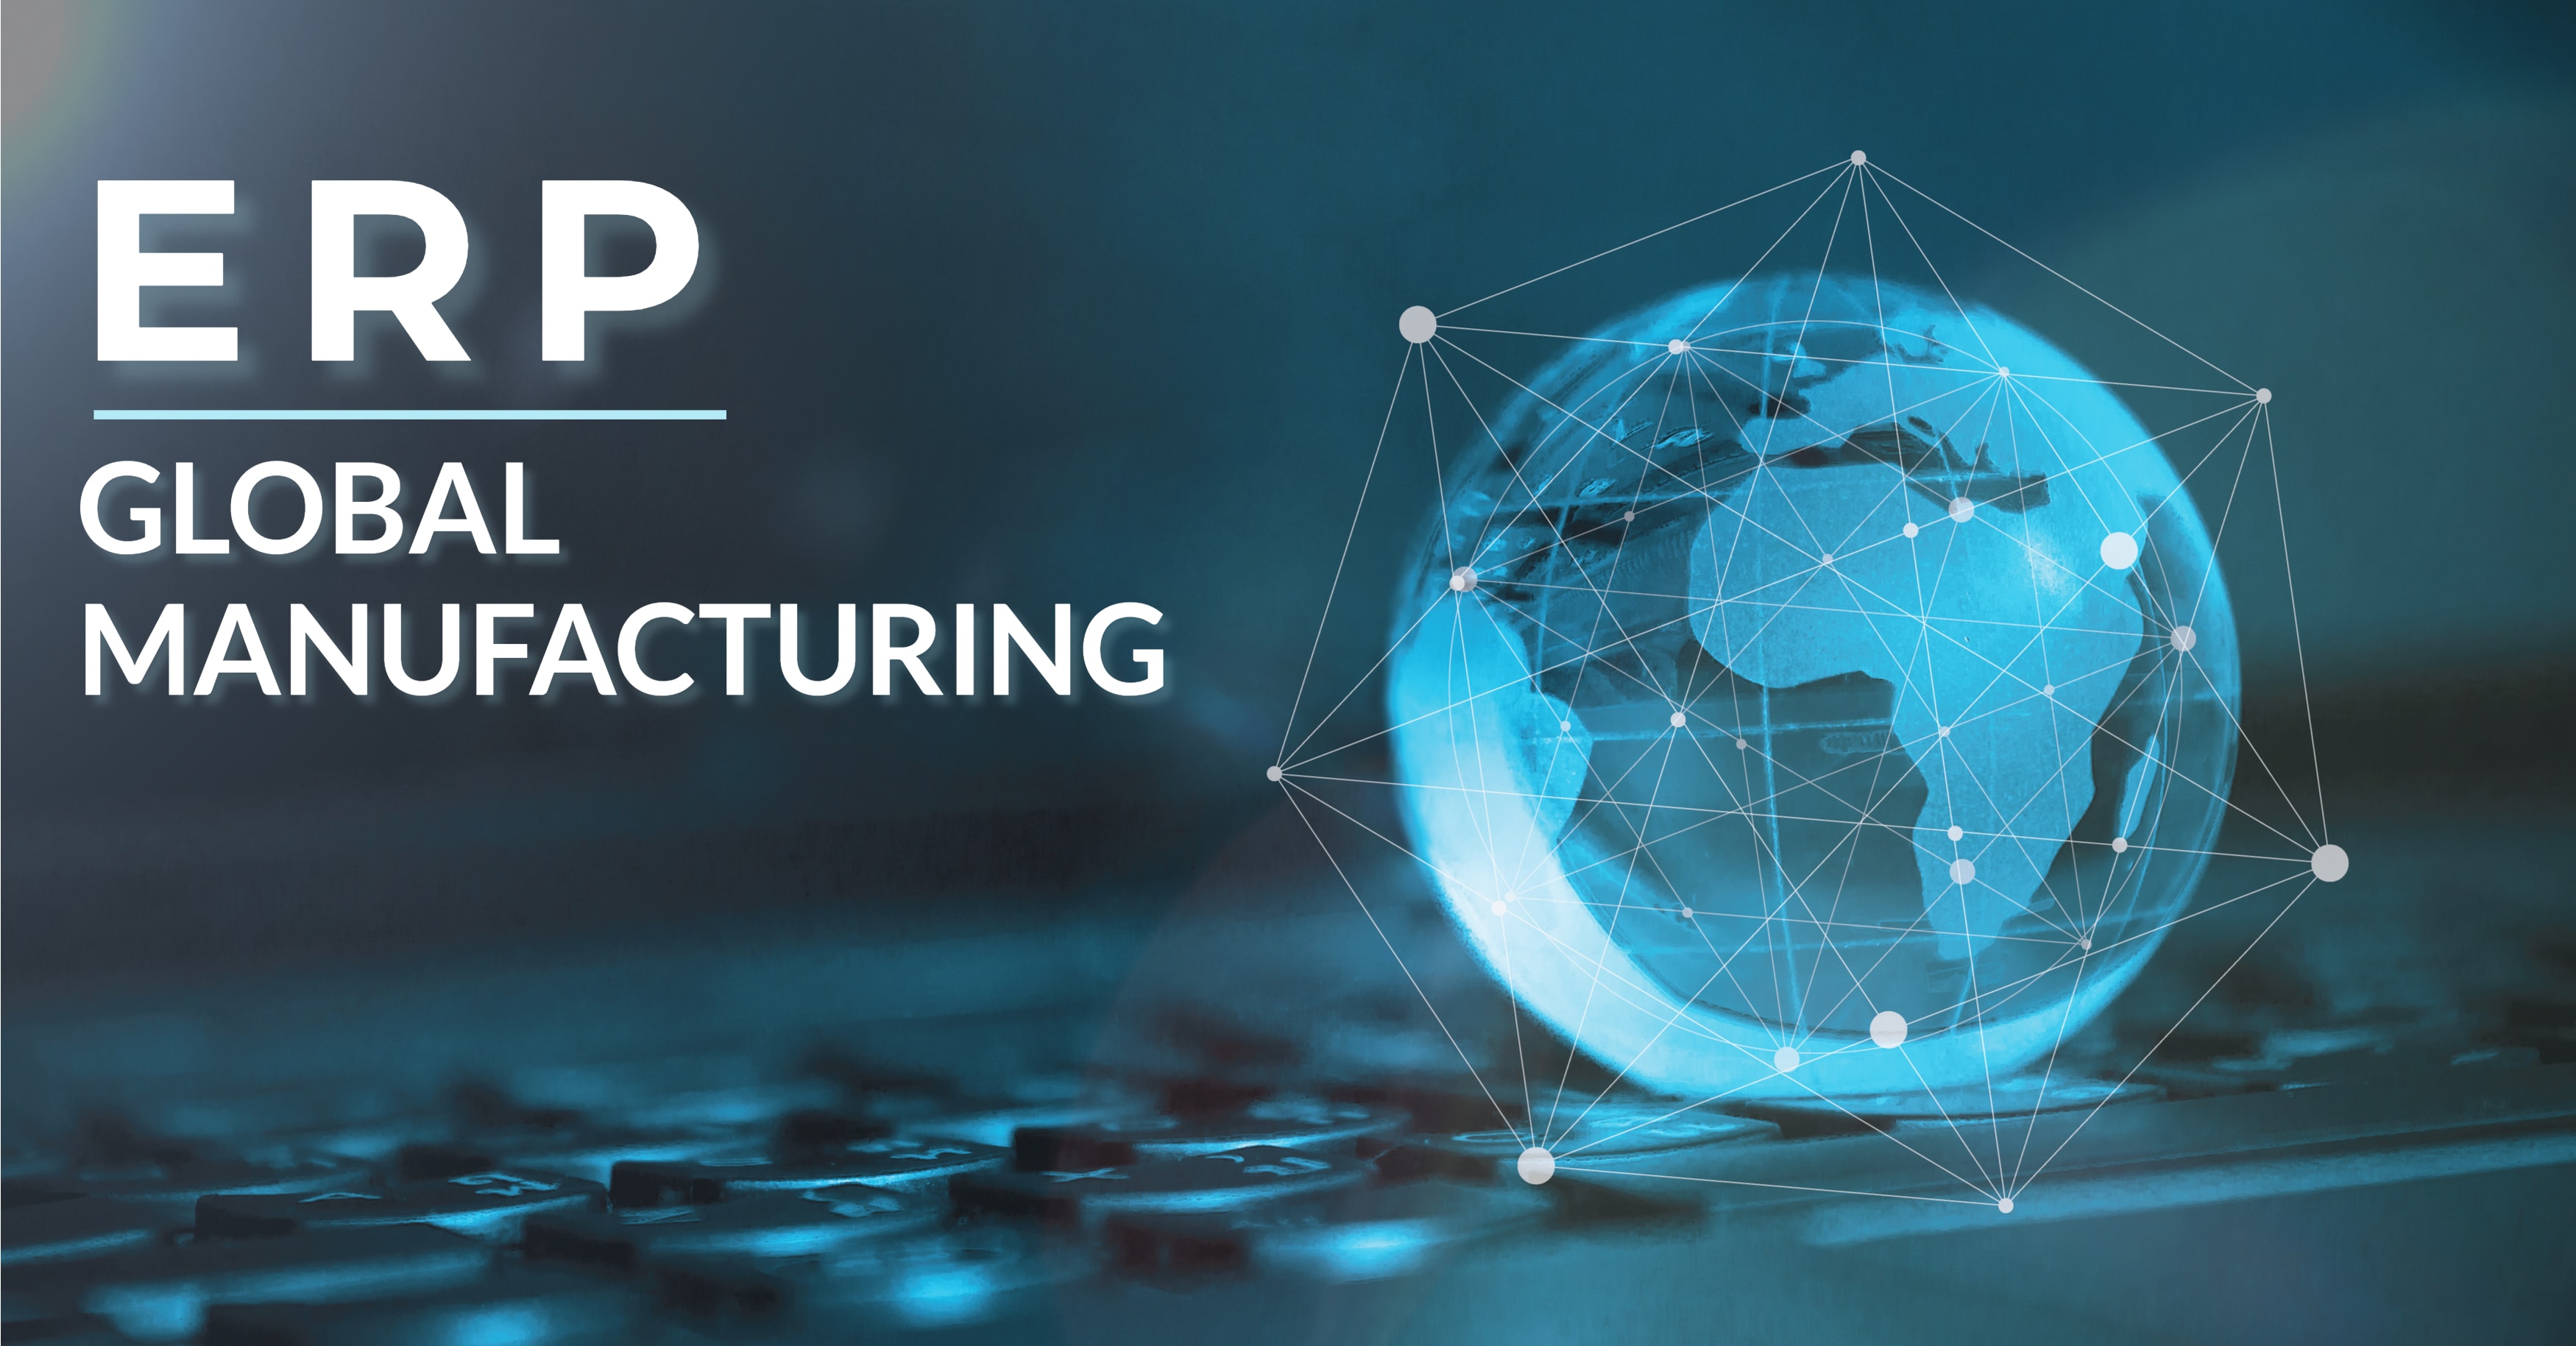 How Will ERP Support Global Manufacturing Changes?